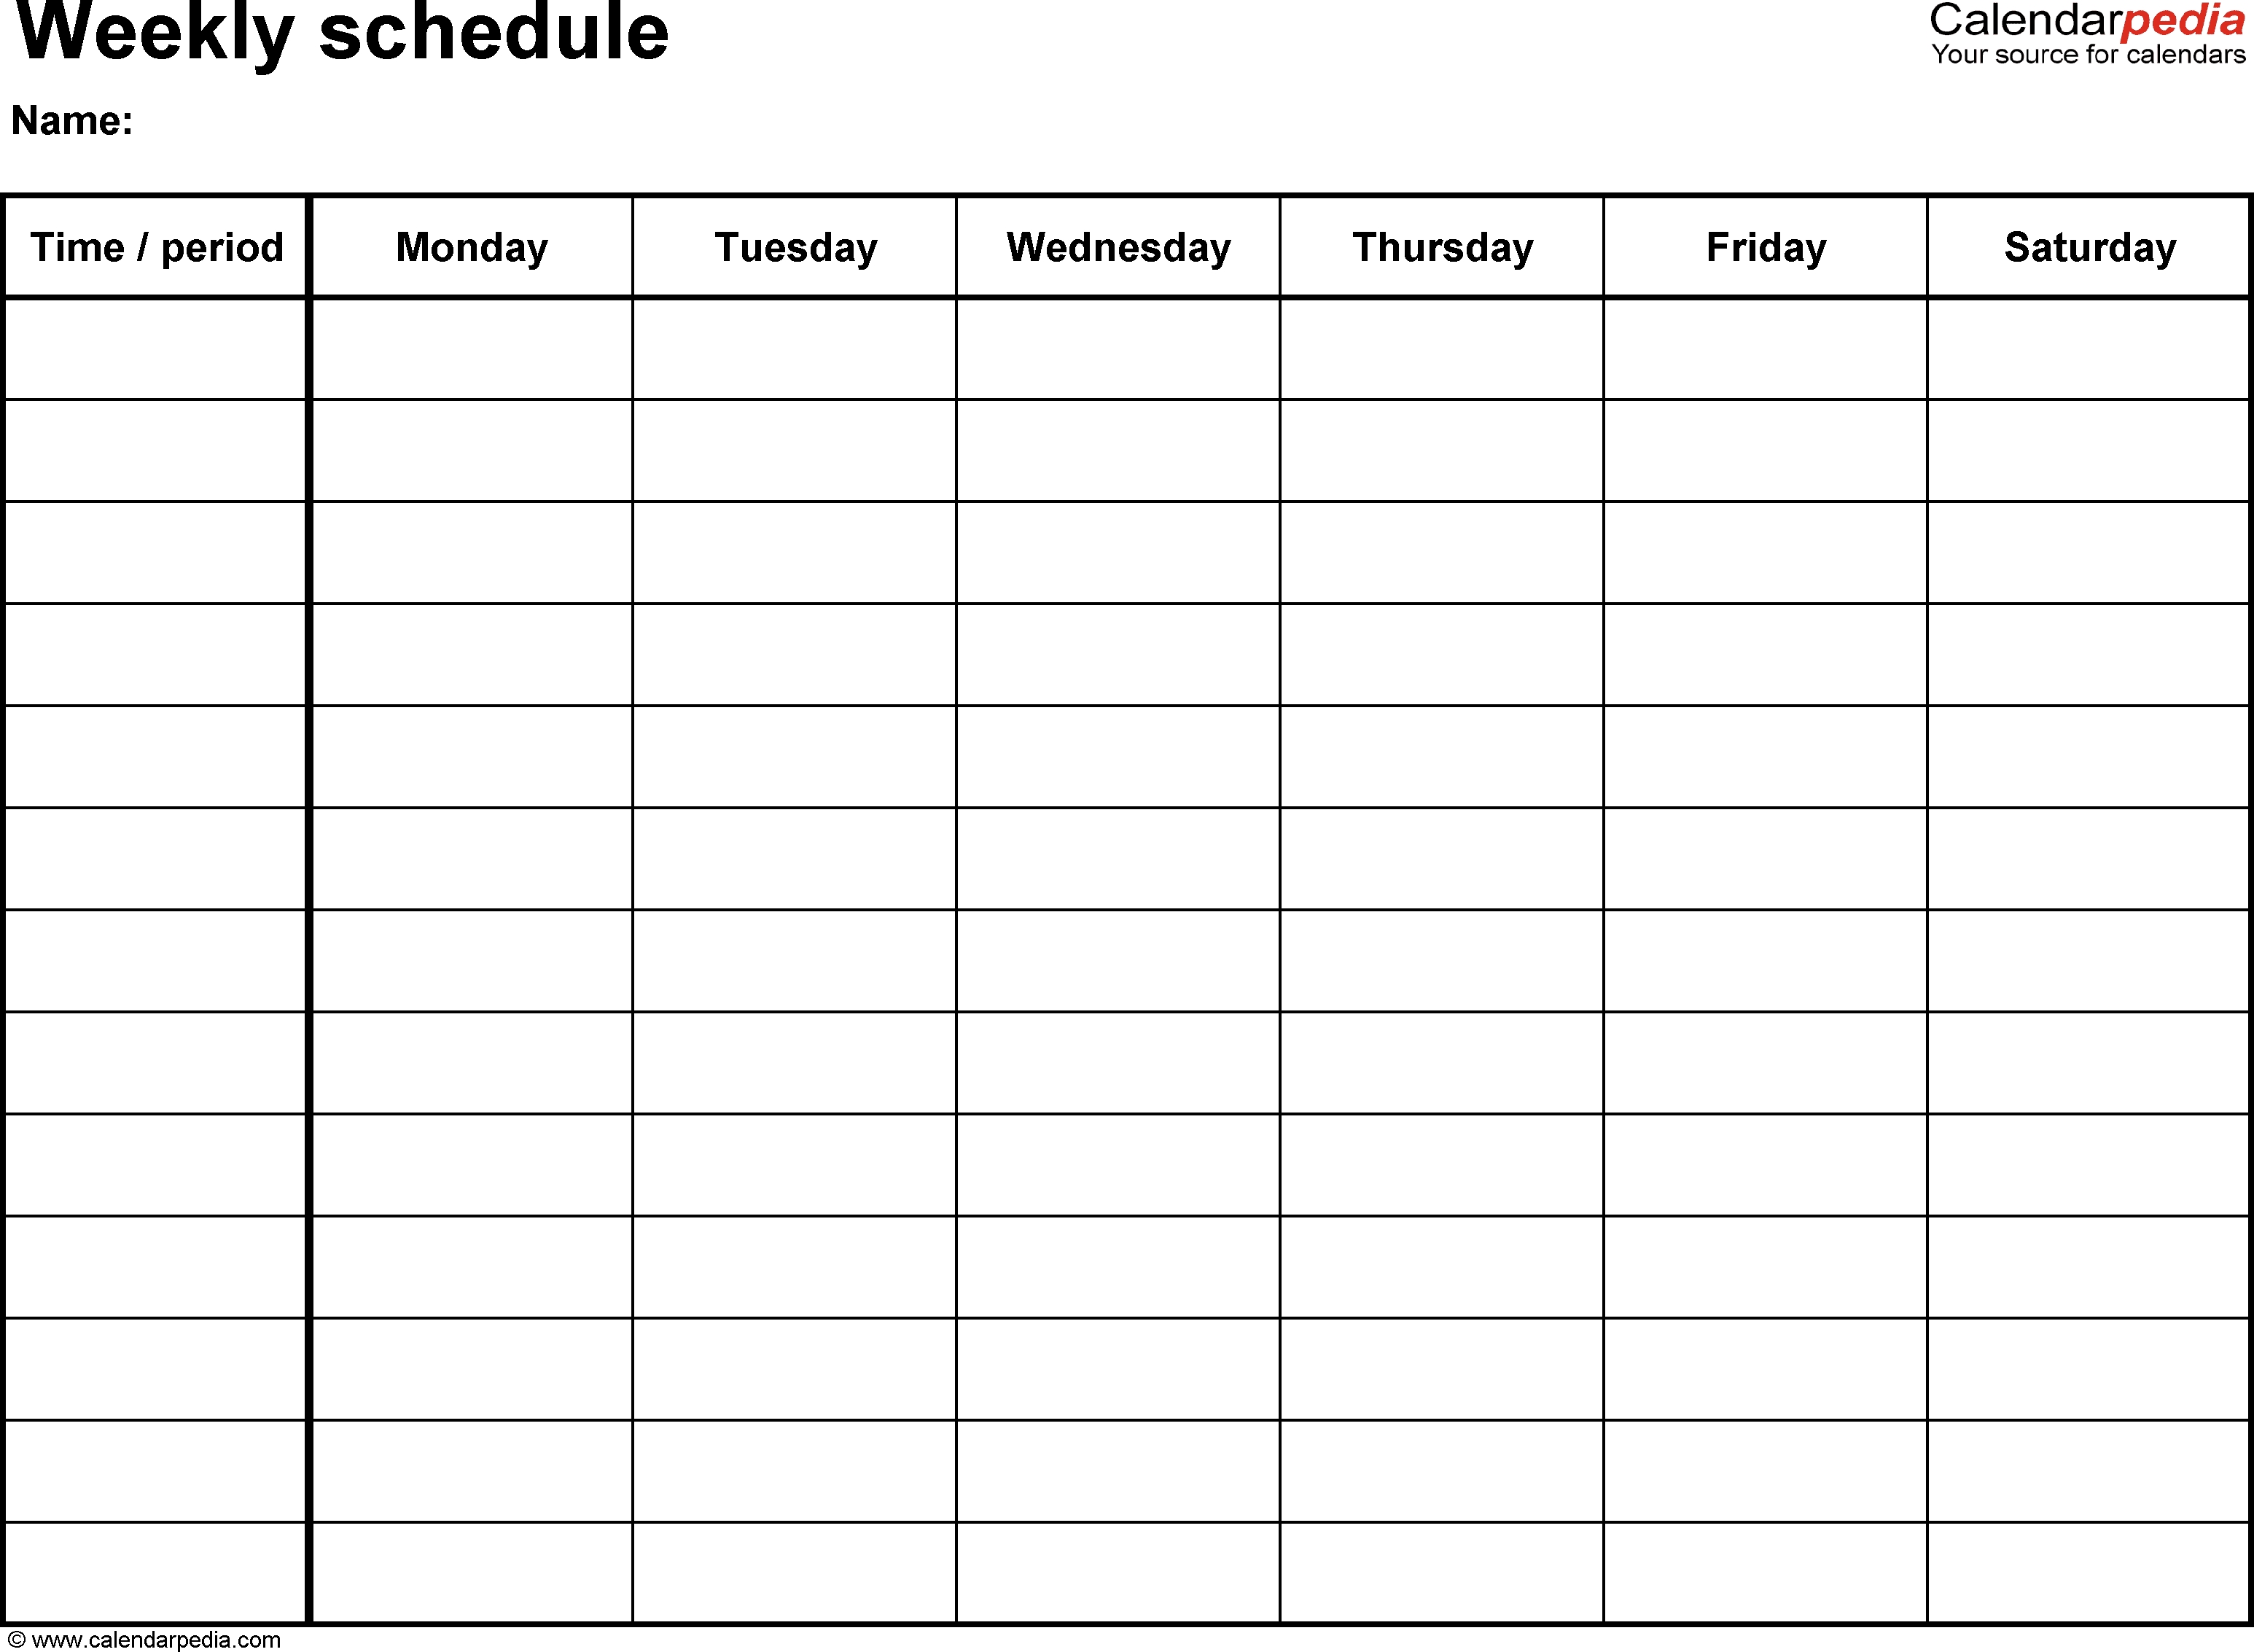 Weekly Appointment Schedule Template - Yeniscale.co  Free Printable 7 Day 15 Minute Appointment Calendar Sheets